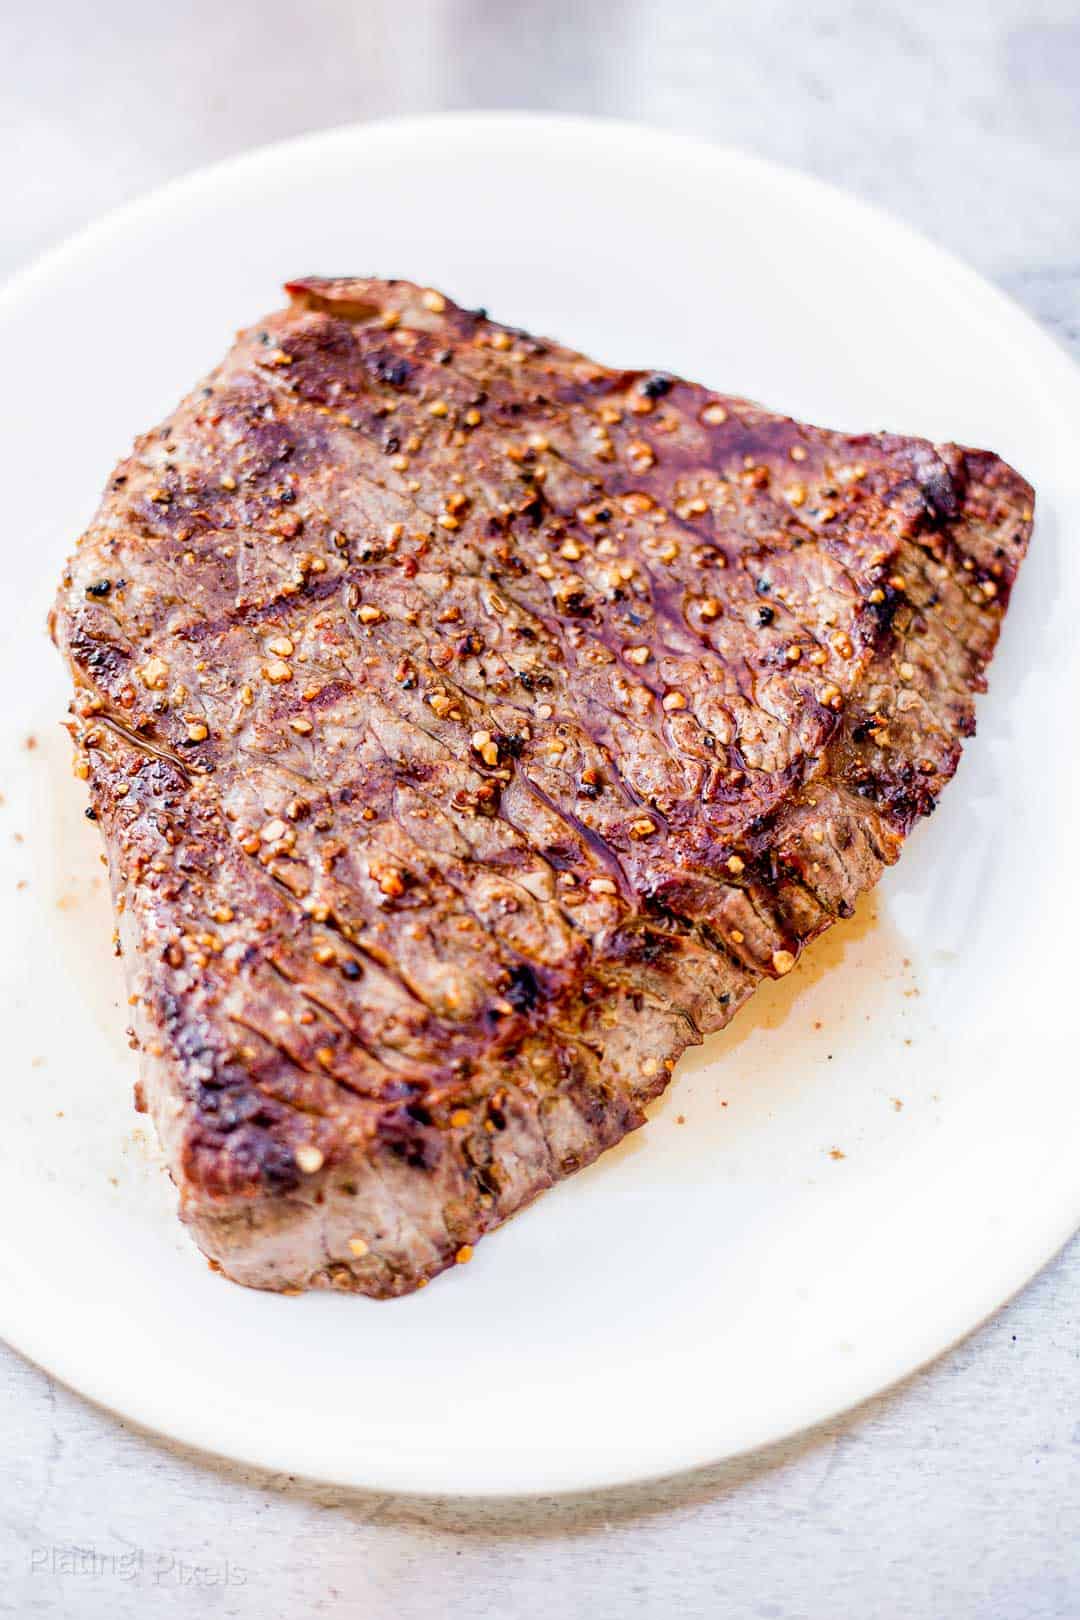 Grilled London Broil steak resting on a plate